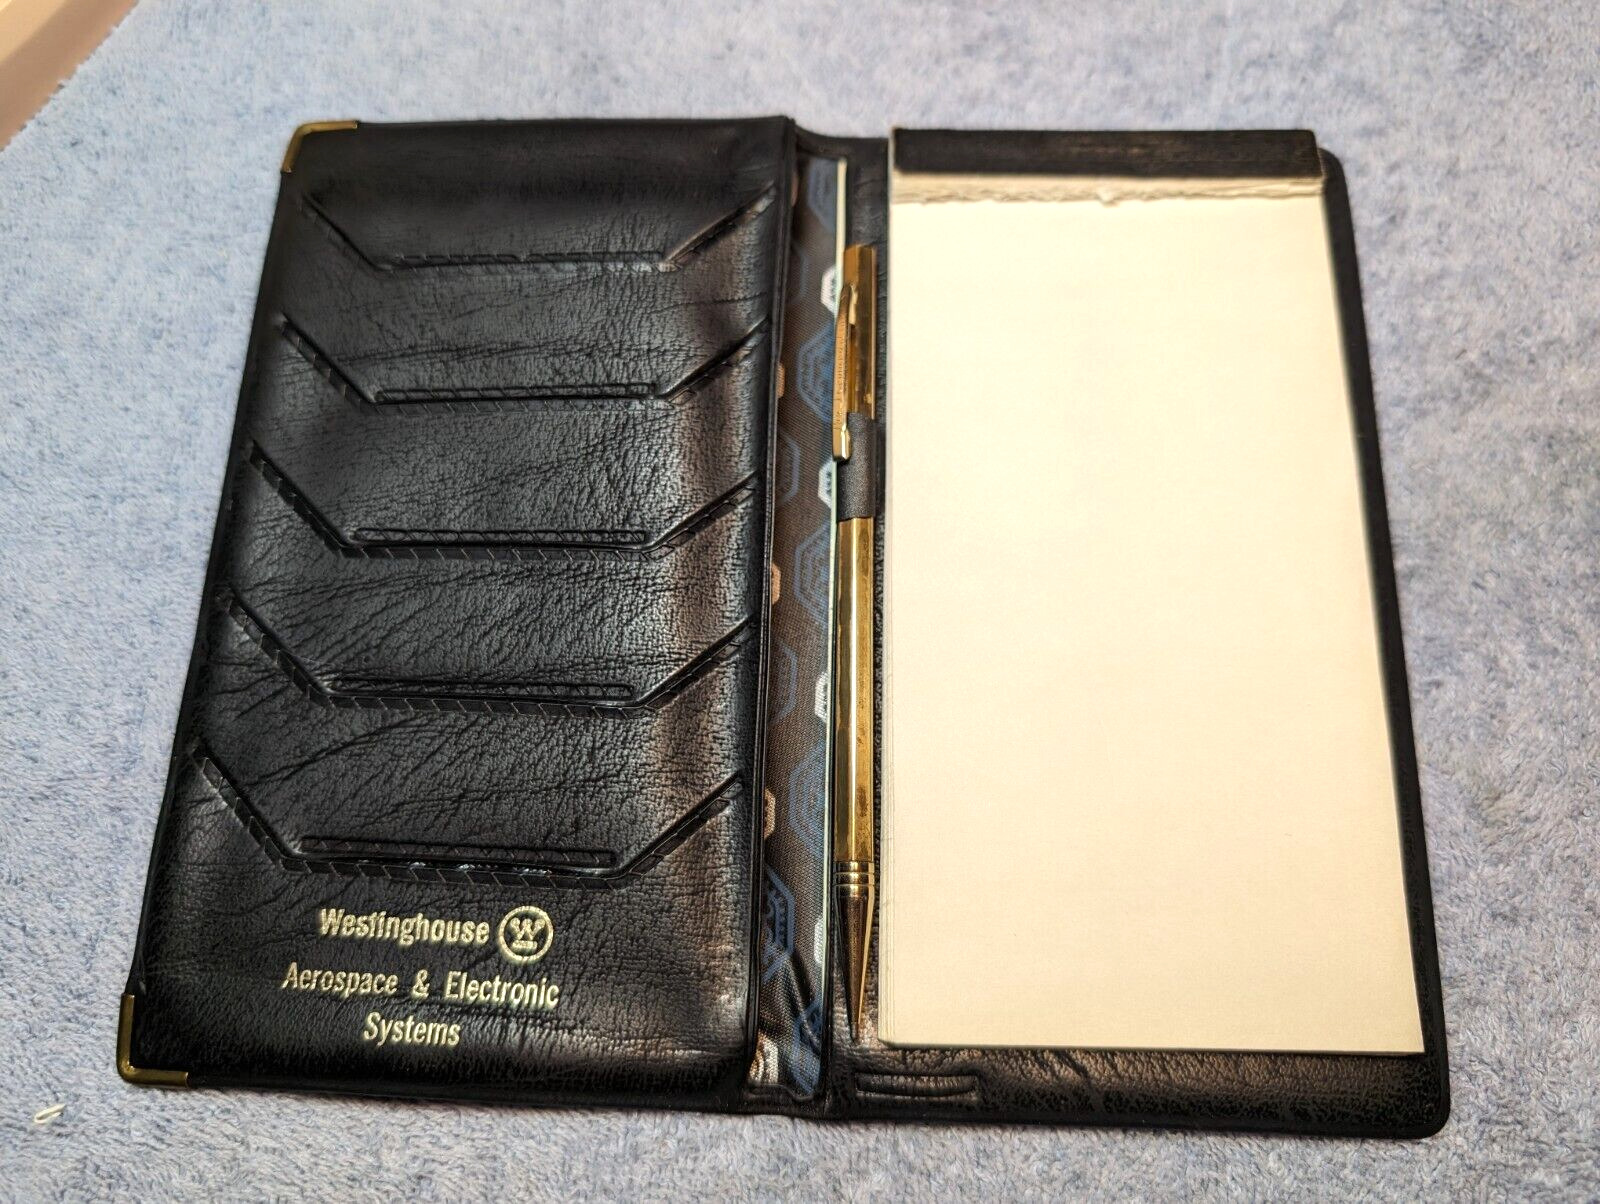 Vintage Westinghouse Aerospace & Electronics Systems Note pad - Leather